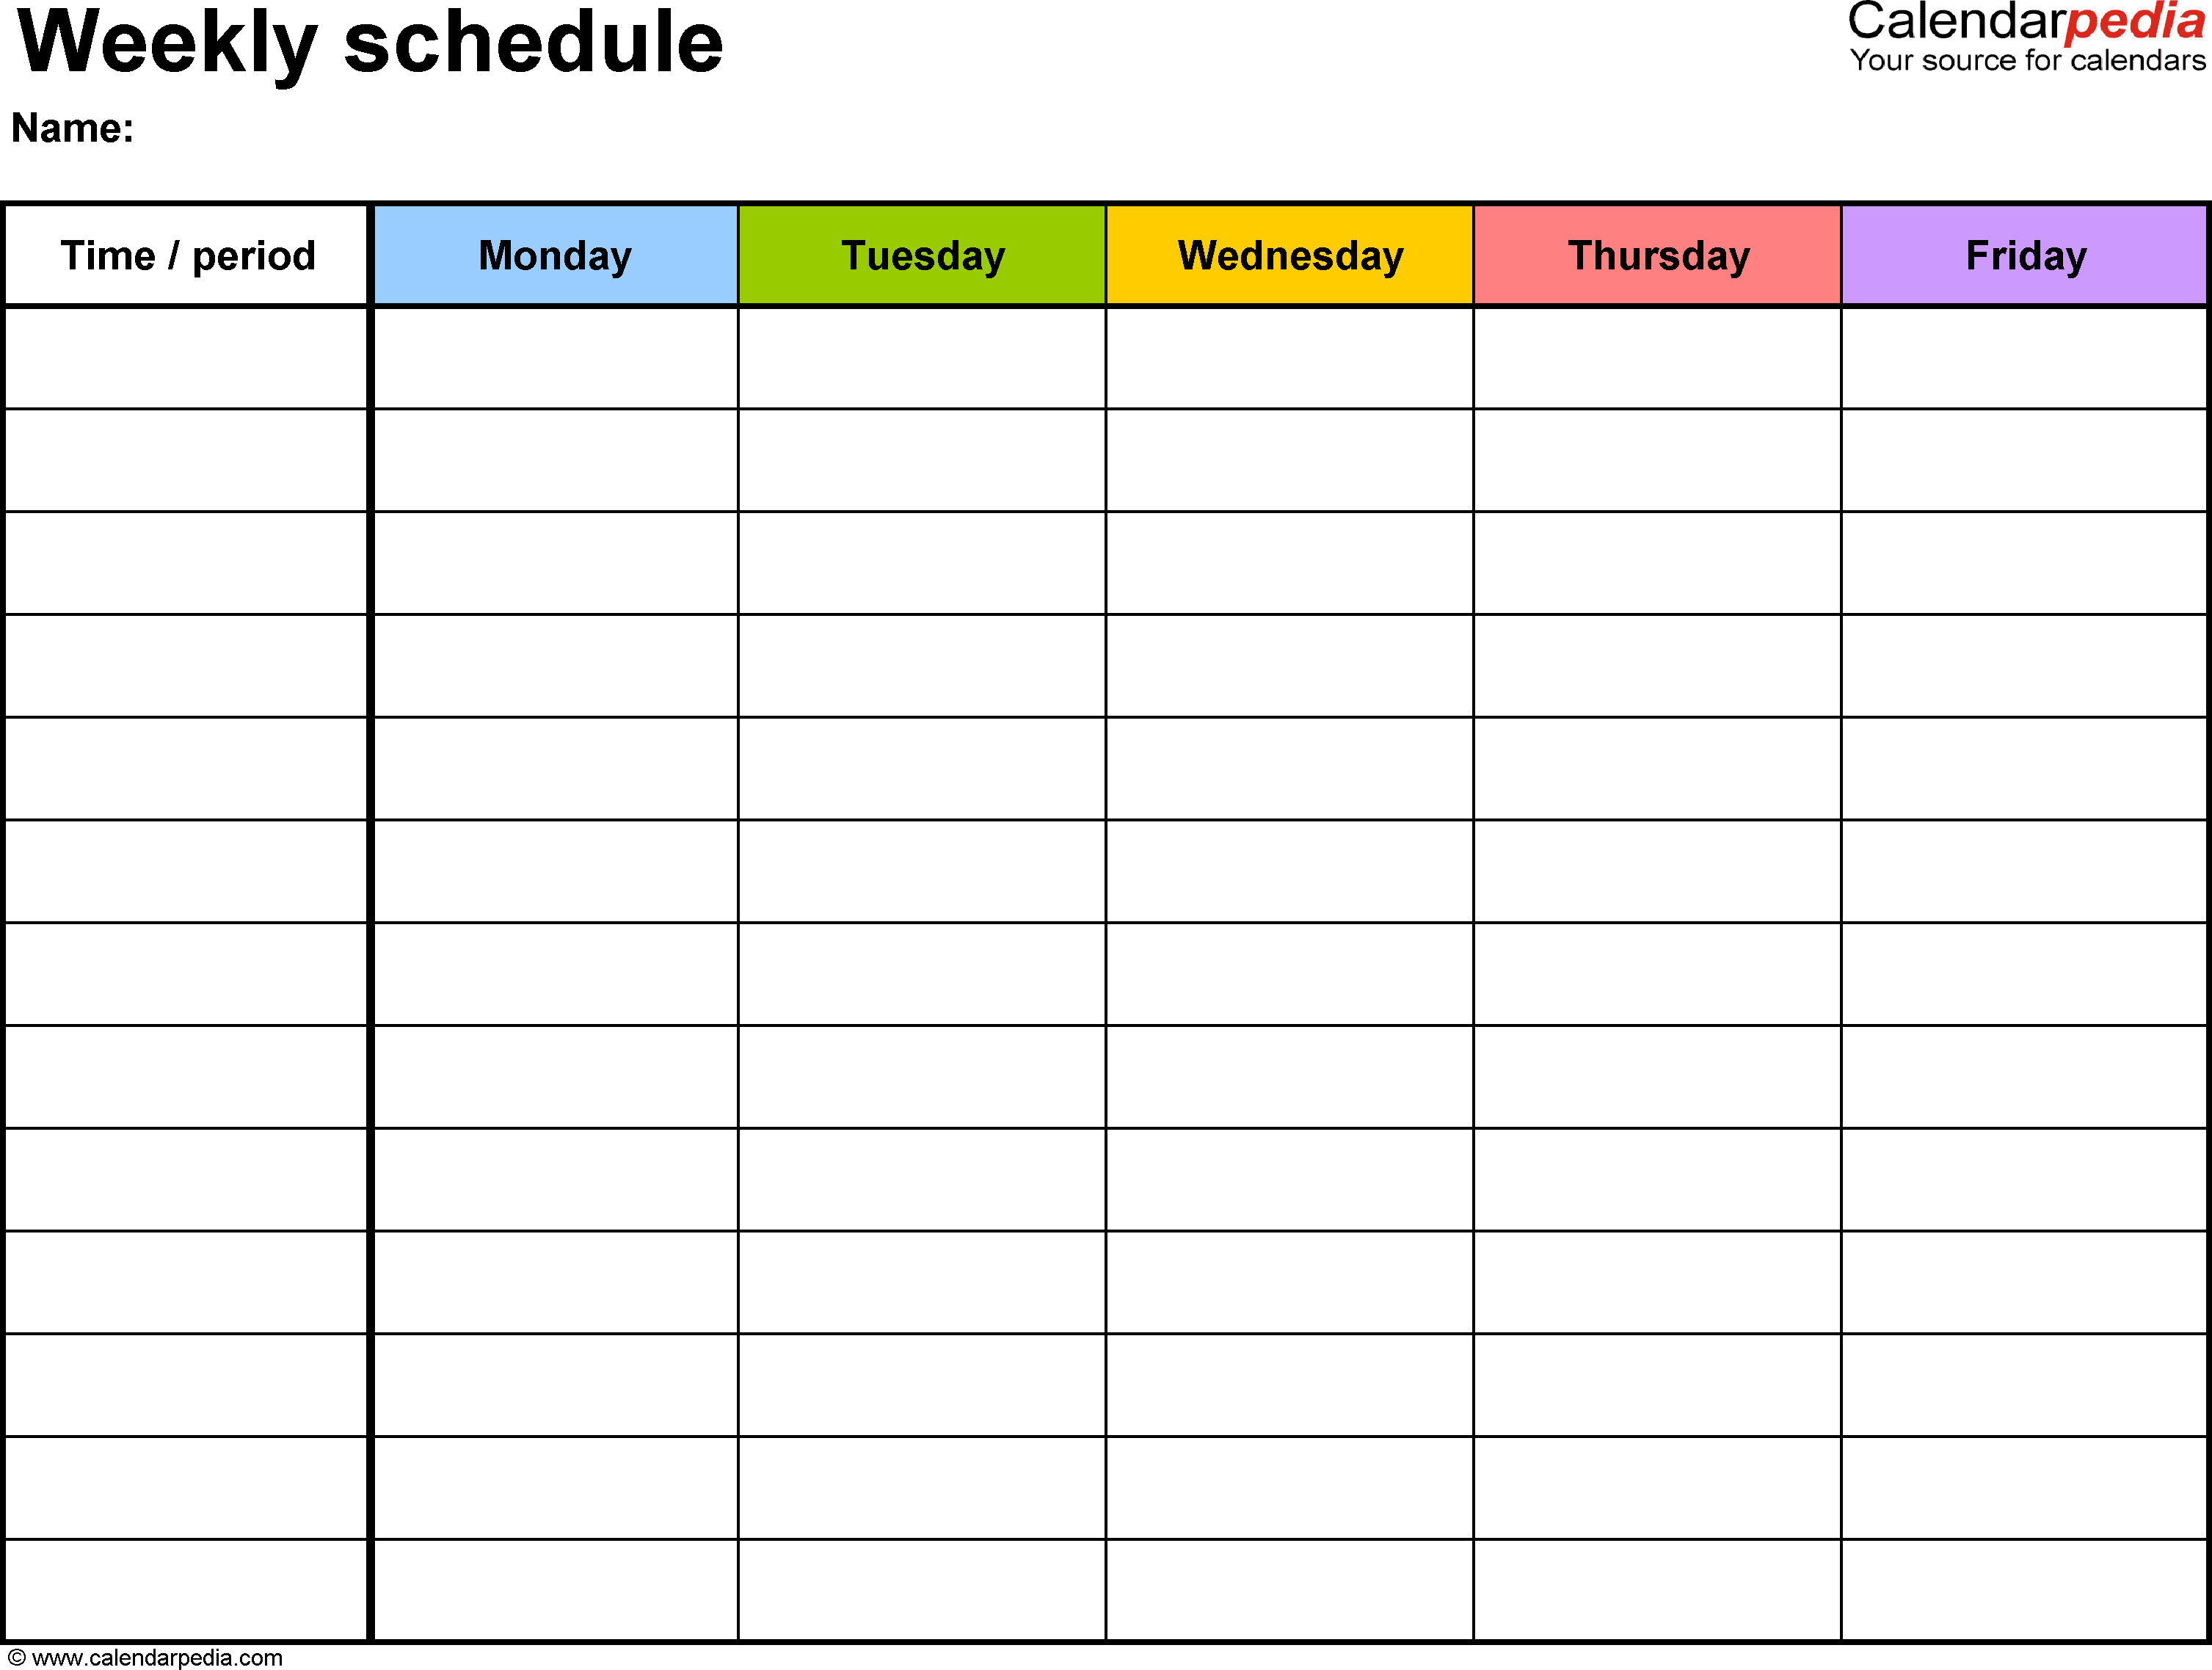 Free Weekly Schedule Templates For Pdf  18 Templates intended for Calendarpedia Weekly Schedule